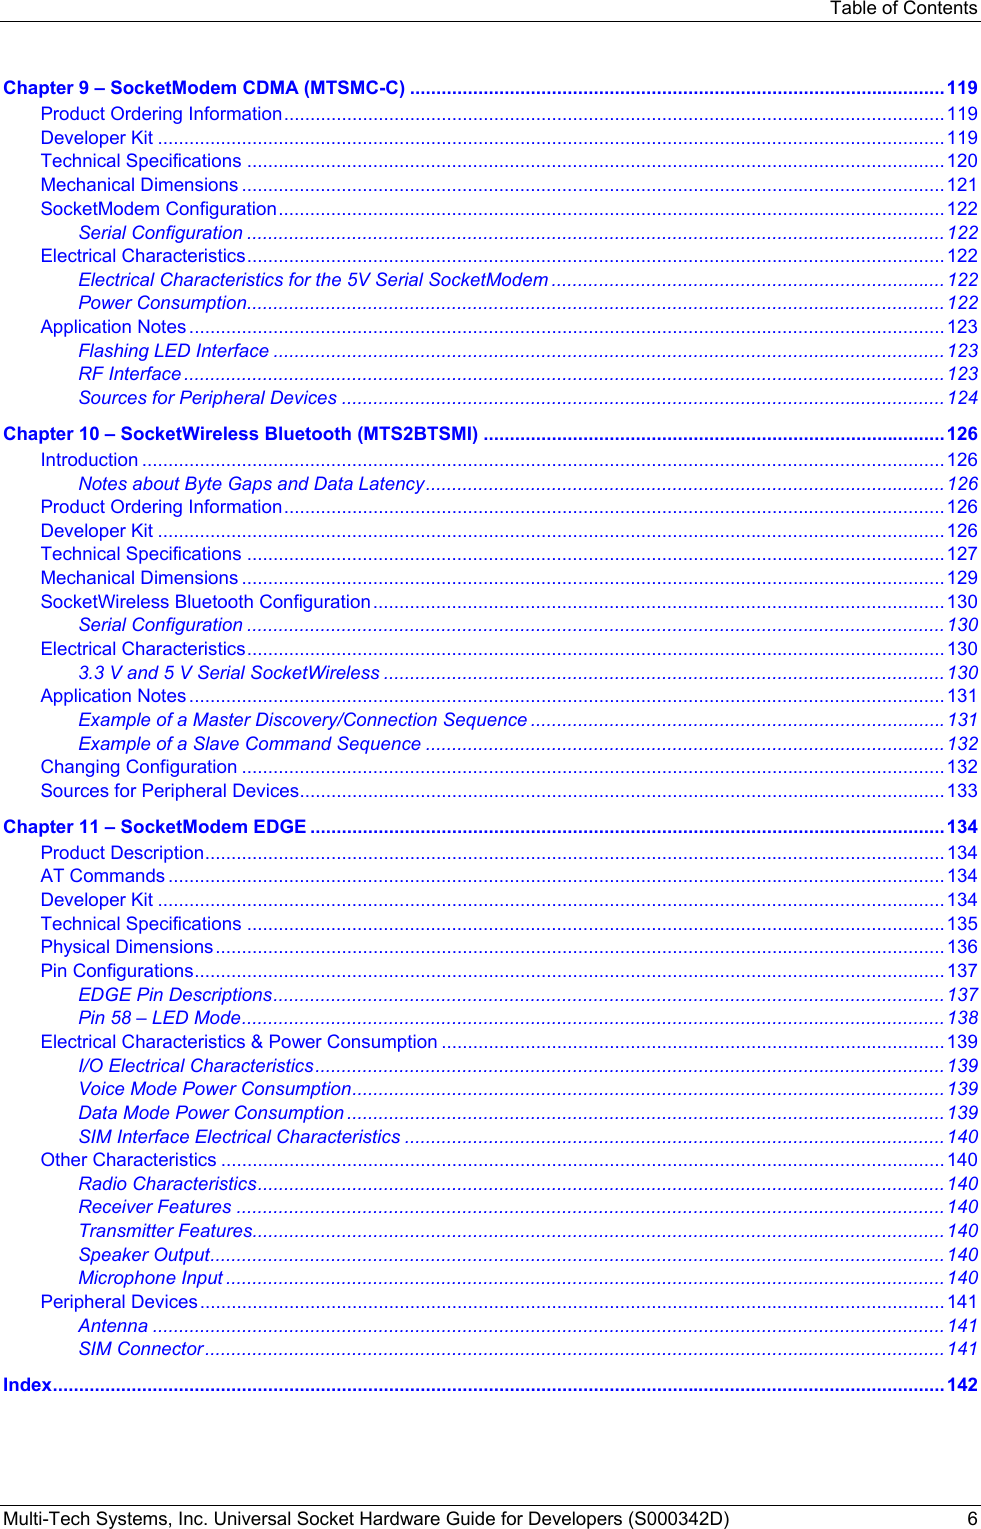 Table of Contents Multi-Tech Systems, Inc. Universal Socket Hardware Guide for Developers (S000342D)  6  Chapter 9 – SocketModem CDMA (MTSMC-C) ......................................................................................................119 Product Ordering Information..............................................................................................................................119 Developer Kit ......................................................................................................................................................119 Technical Specifications .....................................................................................................................................120 Mechanical Dimensions ......................................................................................................................................121 SocketModem Configuration...............................................................................................................................122 Serial Configuration .....................................................................................................................................122 Electrical Characteristics.....................................................................................................................................122 Electrical Characteristics for the 5V Serial SocketModem ...........................................................................122 Power Consumption.....................................................................................................................................122 Application Notes ................................................................................................................................................123 Flashing LED Interface ................................................................................................................................123 RF Interface .................................................................................................................................................123 Sources for Peripheral Devices ...................................................................................................................124 Chapter 10 – SocketWireless Bluetooth (MTS2BTSMI) ........................................................................................ 126 Introduction .........................................................................................................................................................126 Notes about Byte Gaps and Data Latency...................................................................................................126 Product Ordering Information..............................................................................................................................126 Developer Kit ......................................................................................................................................................126 Technical Specifications .....................................................................................................................................127 Mechanical Dimensions ......................................................................................................................................129 SocketWireless Bluetooth Configuration .............................................................................................................130 Serial Configuration .....................................................................................................................................130 Electrical Characteristics.....................................................................................................................................130 3.3 V and 5 V Serial SocketWireless ...........................................................................................................130 Application Notes ................................................................................................................................................131 Example of a Master Discovery/Connection Sequence ...............................................................................131 Example of a Slave Command Sequence ...................................................................................................132 Changing Configuration ......................................................................................................................................132 Sources for Peripheral Devices...........................................................................................................................133 Chapter 11 – SocketModem EDGE .........................................................................................................................134 Product Description.............................................................................................................................................134 AT Commands ....................................................................................................................................................134 Developer Kit ......................................................................................................................................................134 Technical Specifications .....................................................................................................................................135 Physical Dimensions...........................................................................................................................................136 Pin Configurations...............................................................................................................................................137 EDGE Pin Descriptions................................................................................................................................137 Pin 58 – LED Mode......................................................................................................................................138 Electrical Characteristics &amp; Power Consumption ................................................................................................139 I/O Electrical Characteristics........................................................................................................................139 Voice Mode Power Consumption.................................................................................................................139 Data Mode Power Consumption ..................................................................................................................139 SIM Interface Electrical Characteristics .......................................................................................................140 Other Characteristics ..........................................................................................................................................140 Radio Characteristics...................................................................................................................................140 Receiver Features .......................................................................................................................................140 Transmitter Features....................................................................................................................................140 Speaker Output............................................................................................................................................140 Microphone Input .........................................................................................................................................140 Peripheral Devices..............................................................................................................................................141 Antenna .......................................................................................................................................................141 SIM Connector.............................................................................................................................................141 Index..........................................................................................................................................................................142 